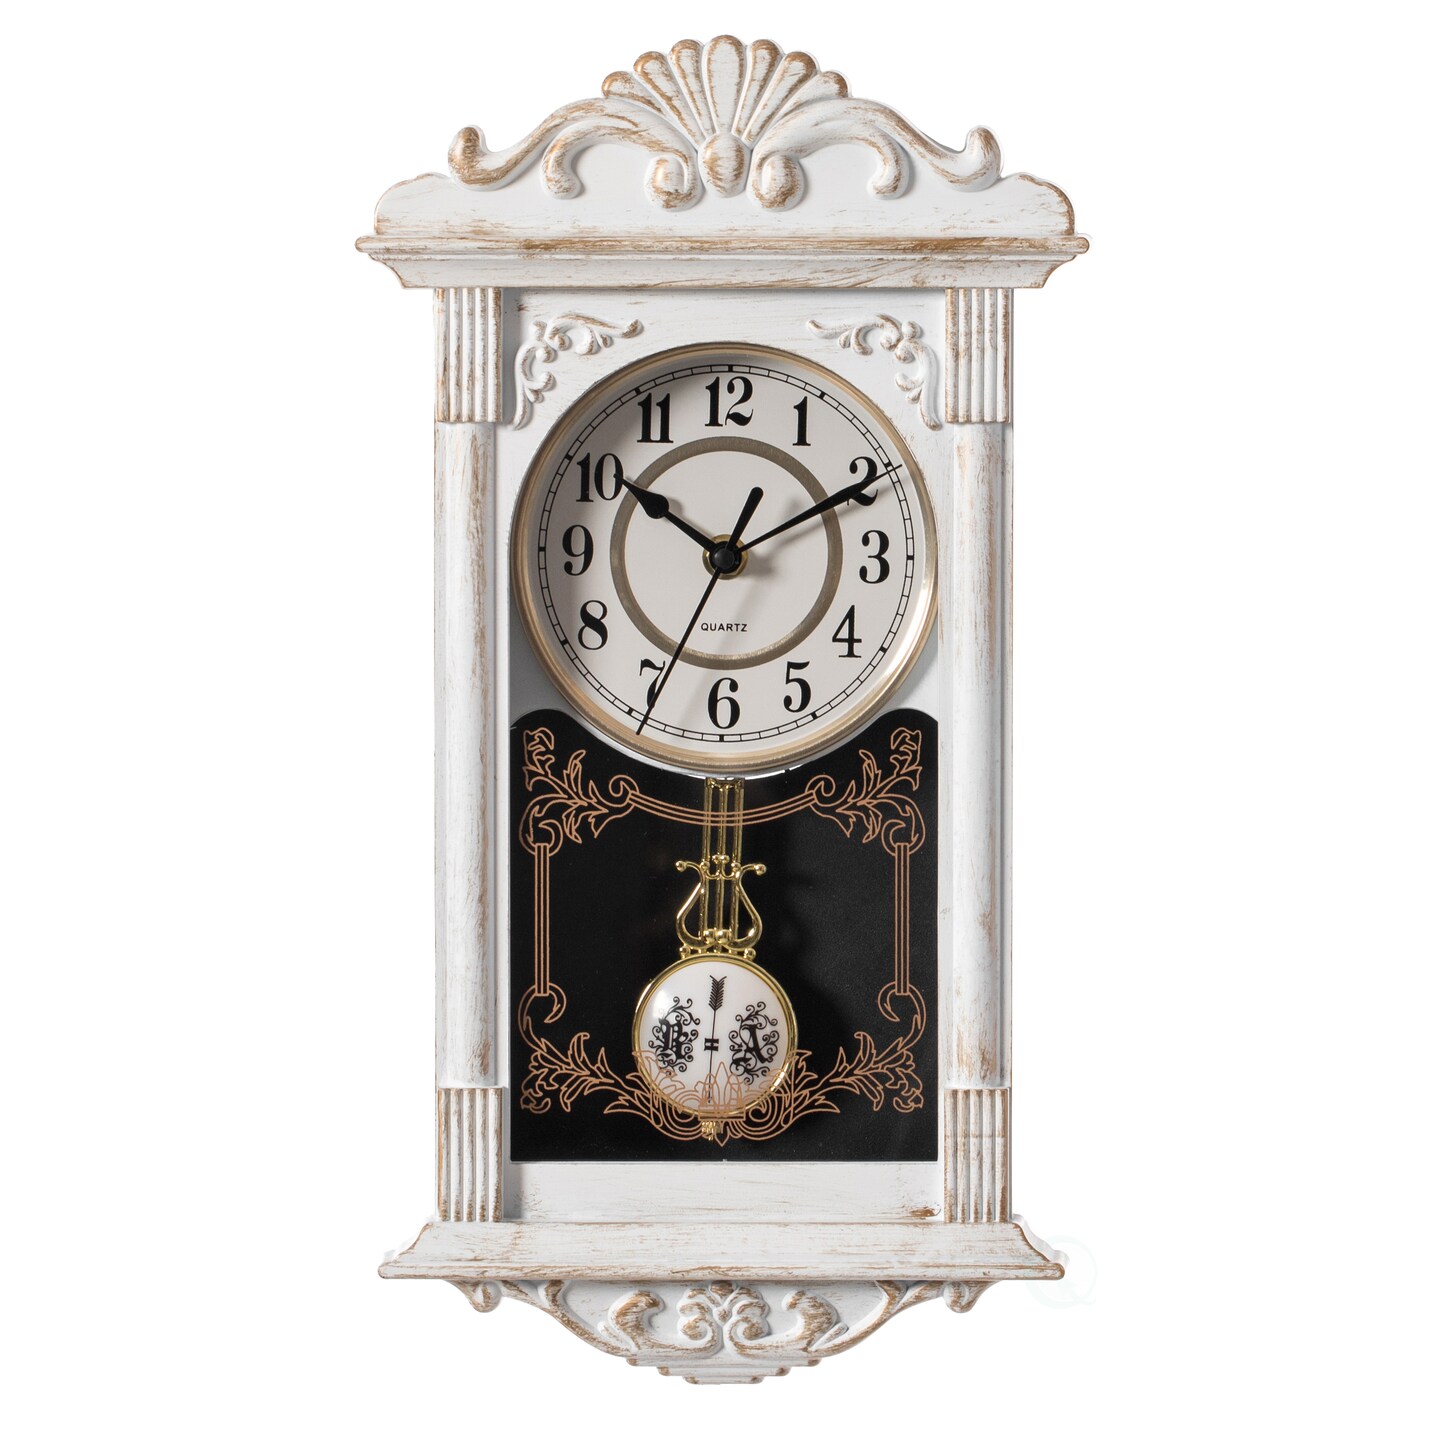 Clockswise Vintage Grandfather Wood-Looking Plastic Pendulum Decorative Battery Operated Wall Clock Brown, for Office, Home Decor, Living Room, Kitchen, or Dining Room